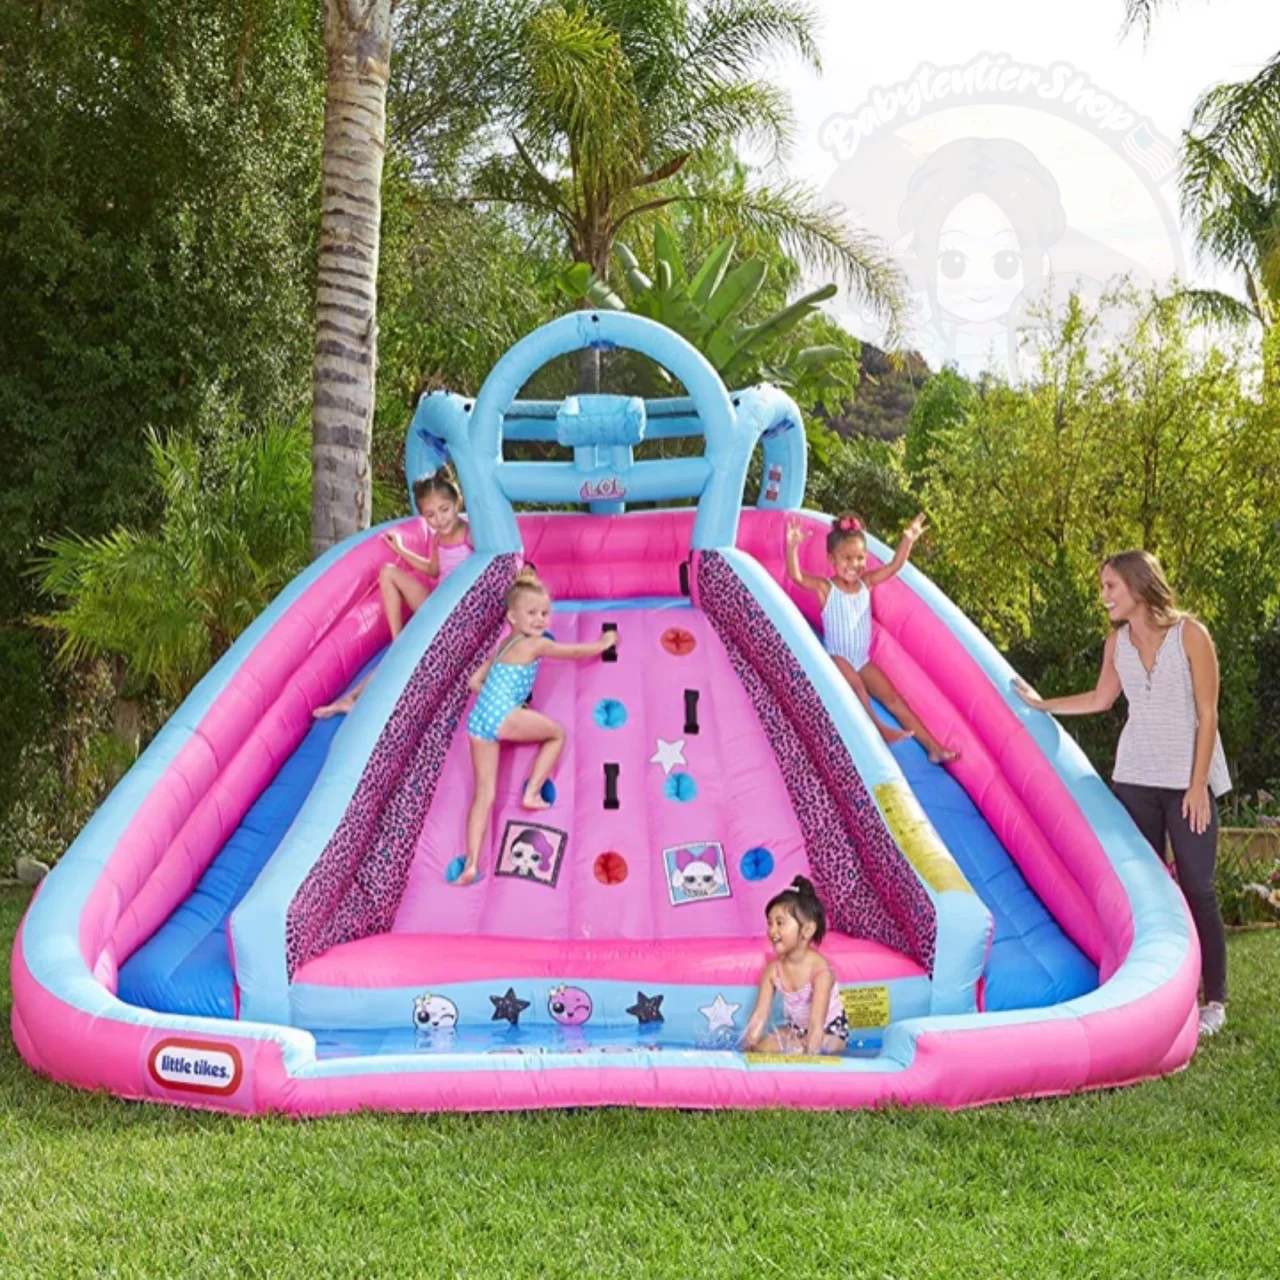 L.O.L. Surprise Inflatable River Race Water Slide with Blower